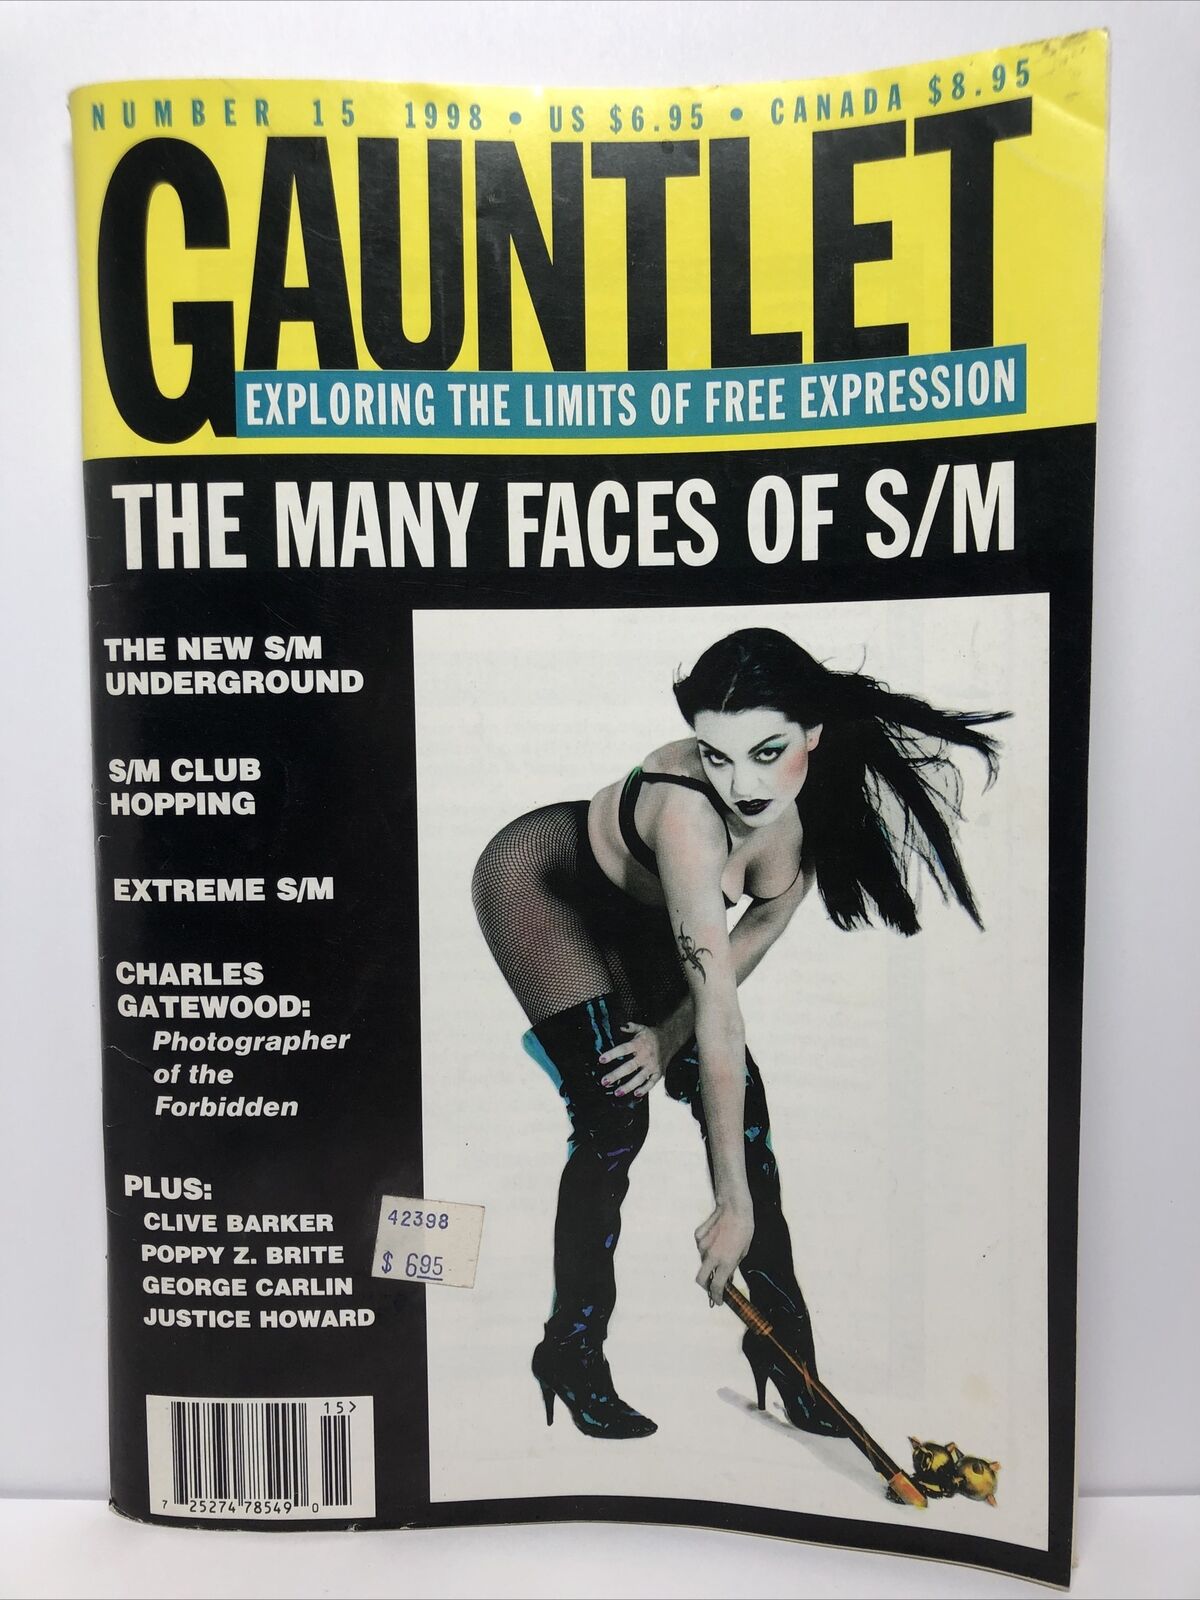 Gauntlet Exploring the Limits of Free Expression  Magazine Number 15, 1998 VG